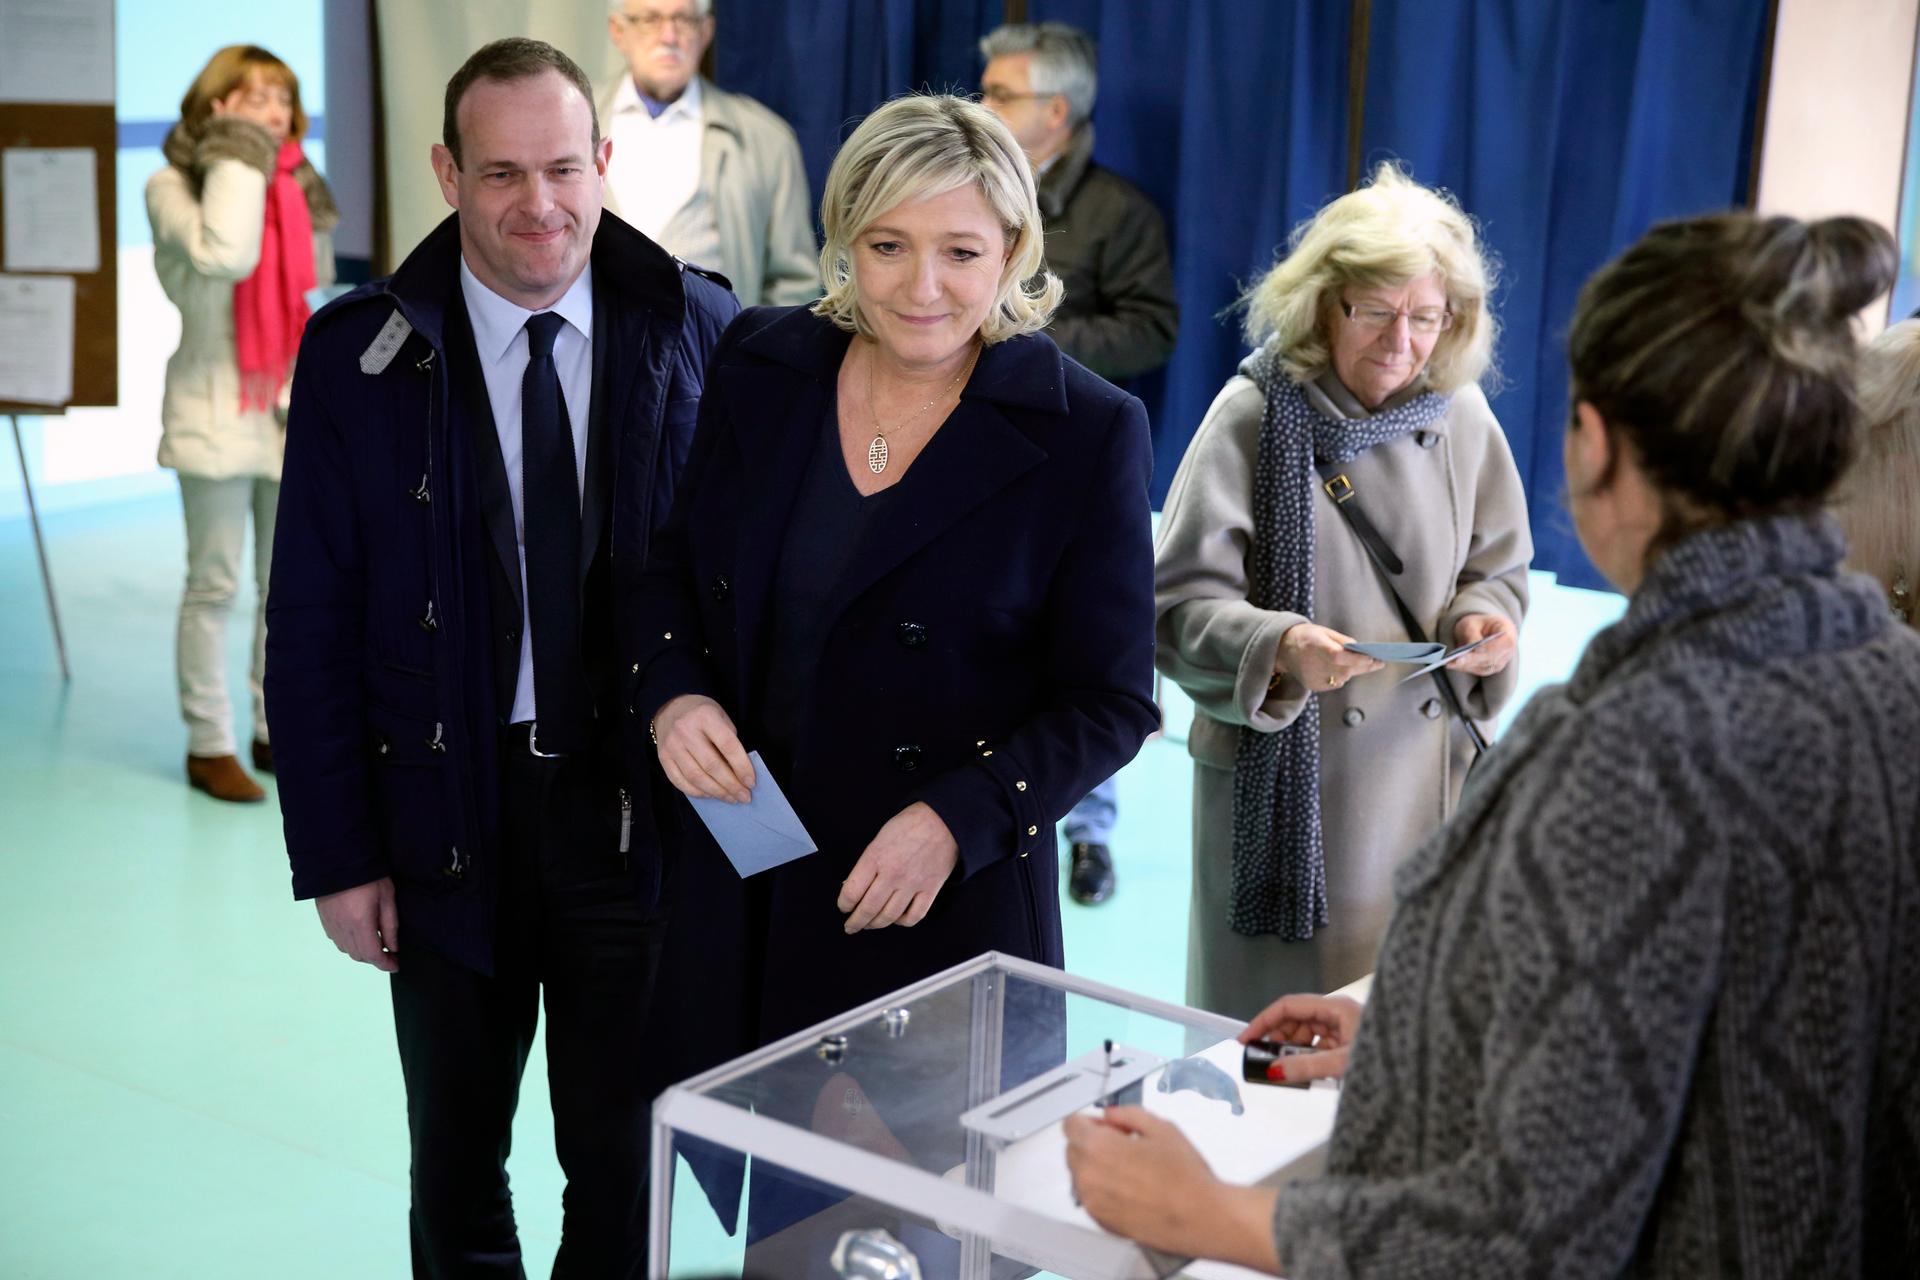 France's far-right National Front political party leader Marine Le Pen, center, prepares to cast her ballot at a polling station during the first round of the French mayoral elections in Henin Beaumont, Northern France, March 23, 2014. 